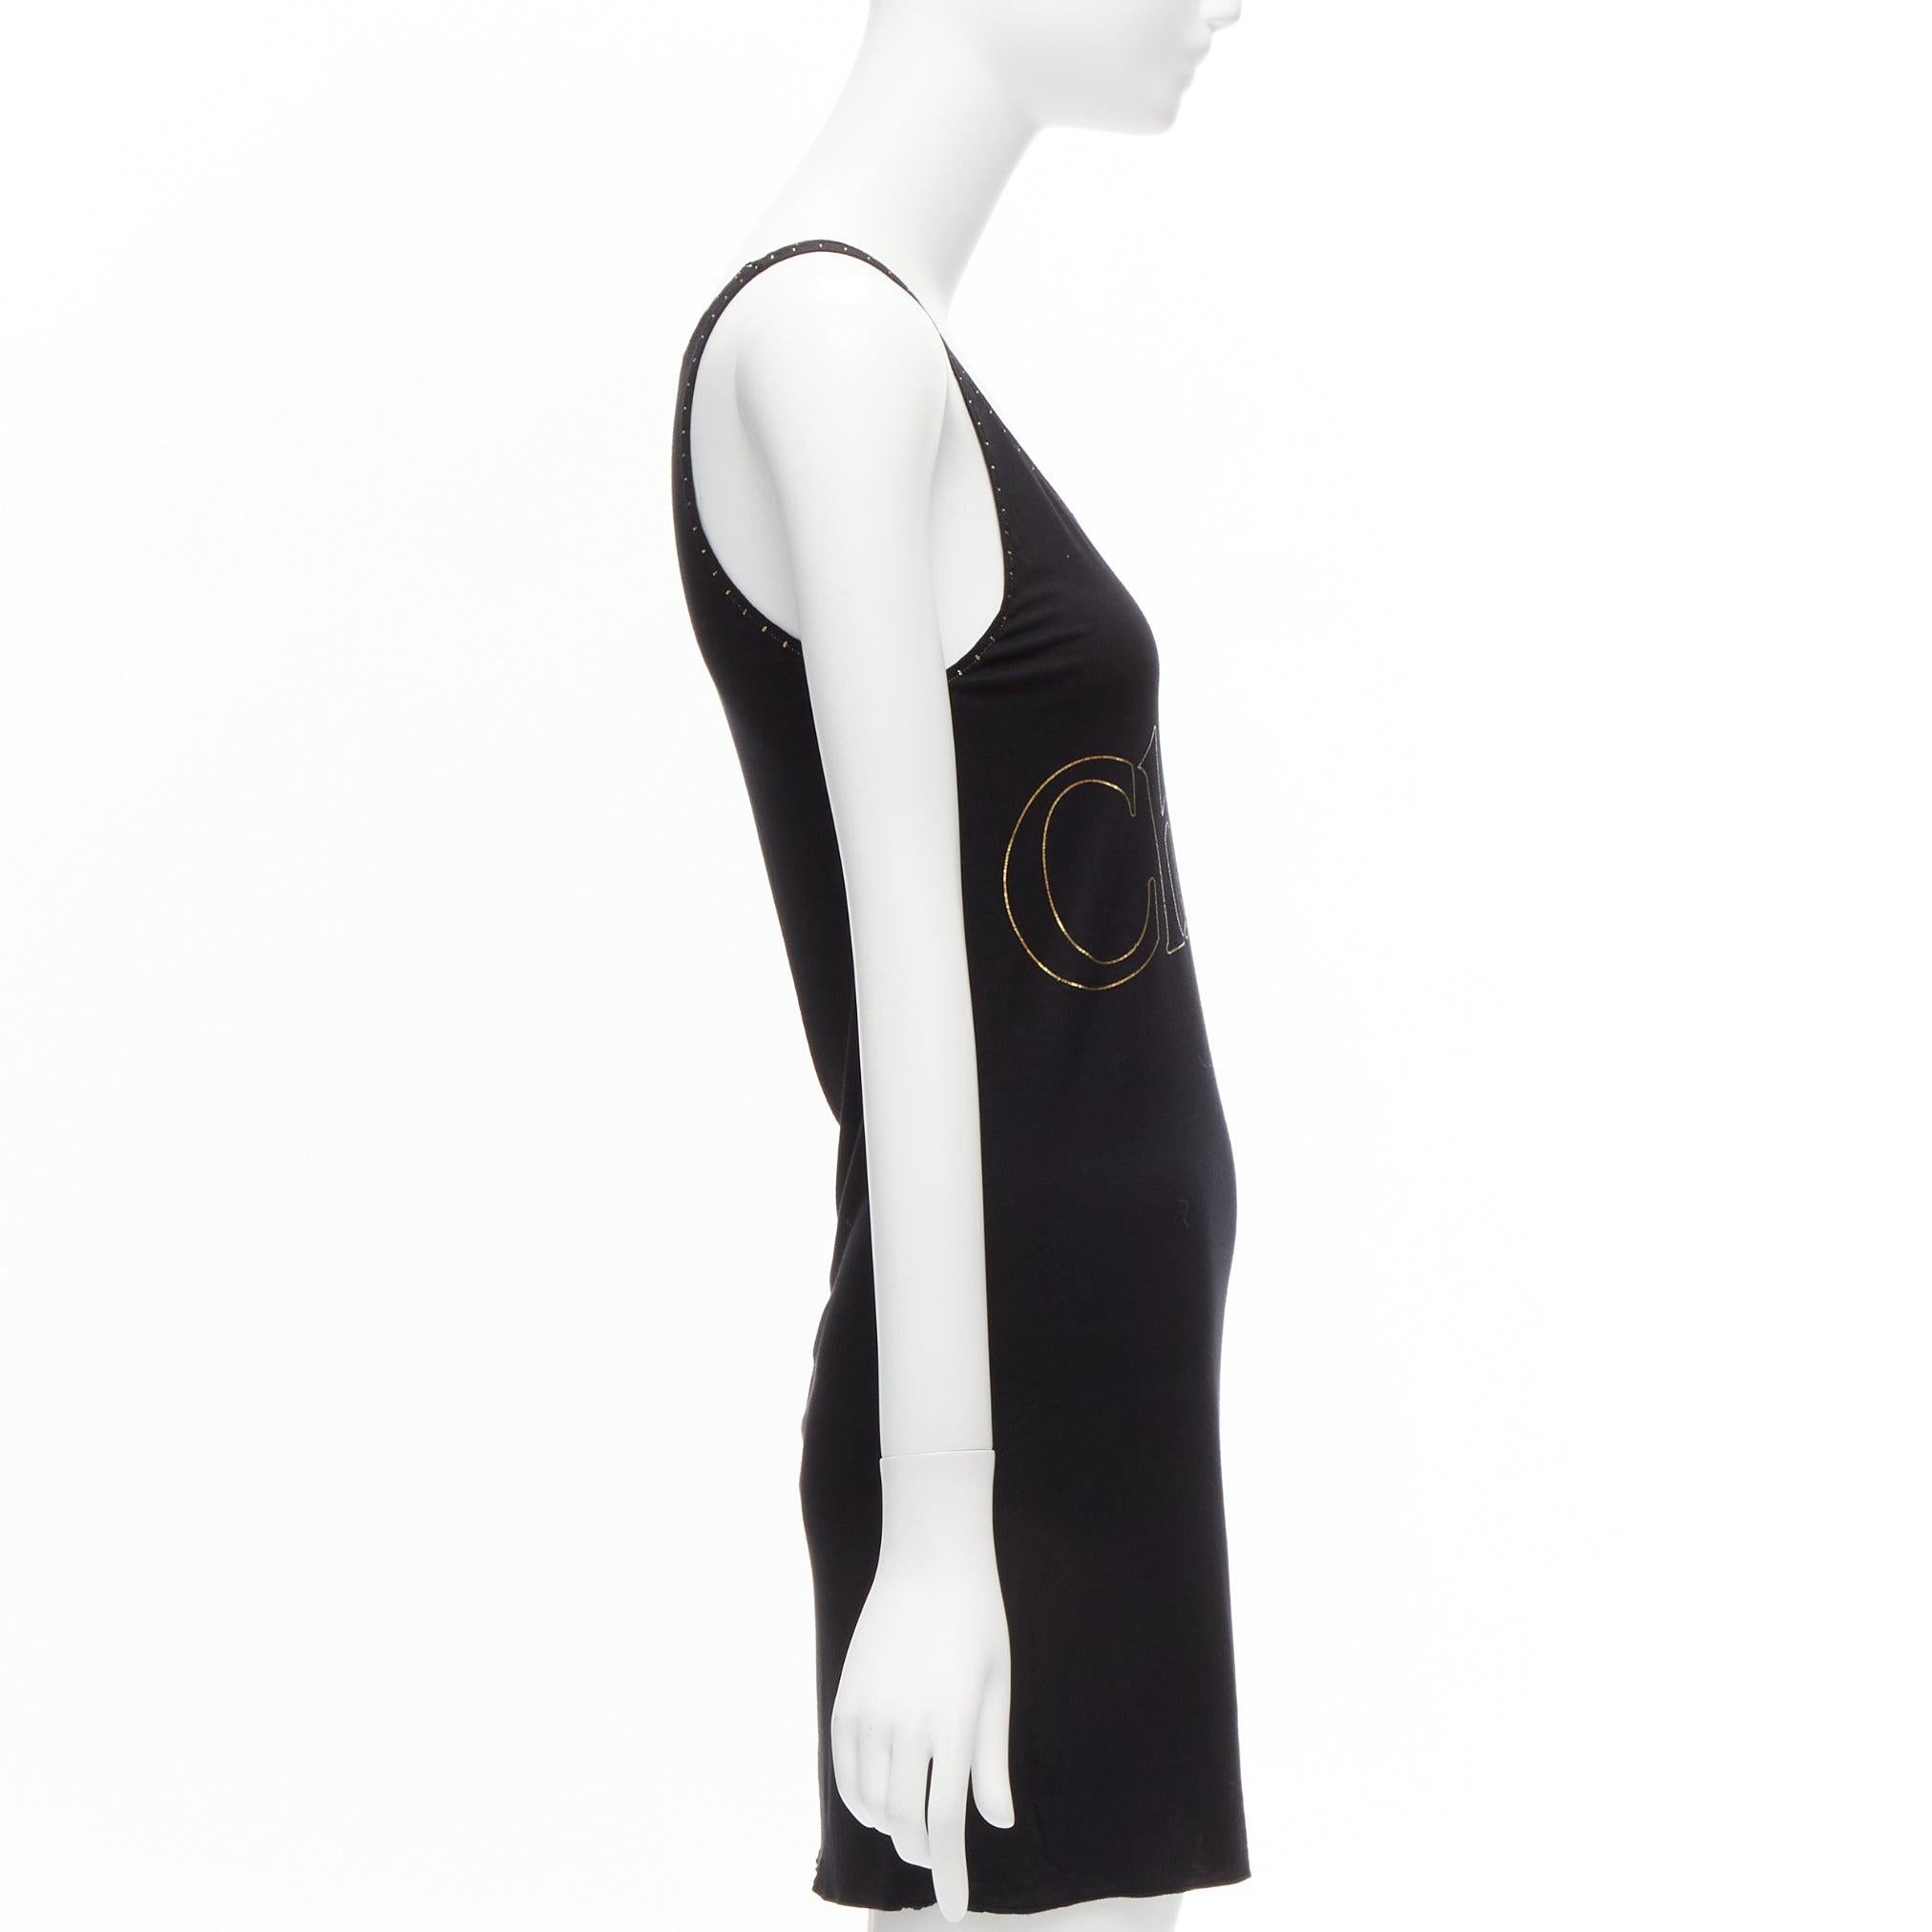 CHLOE gold foil logo black topstitch detail rock chic tank top dress S In Fair Condition For Sale In Hong Kong, NT